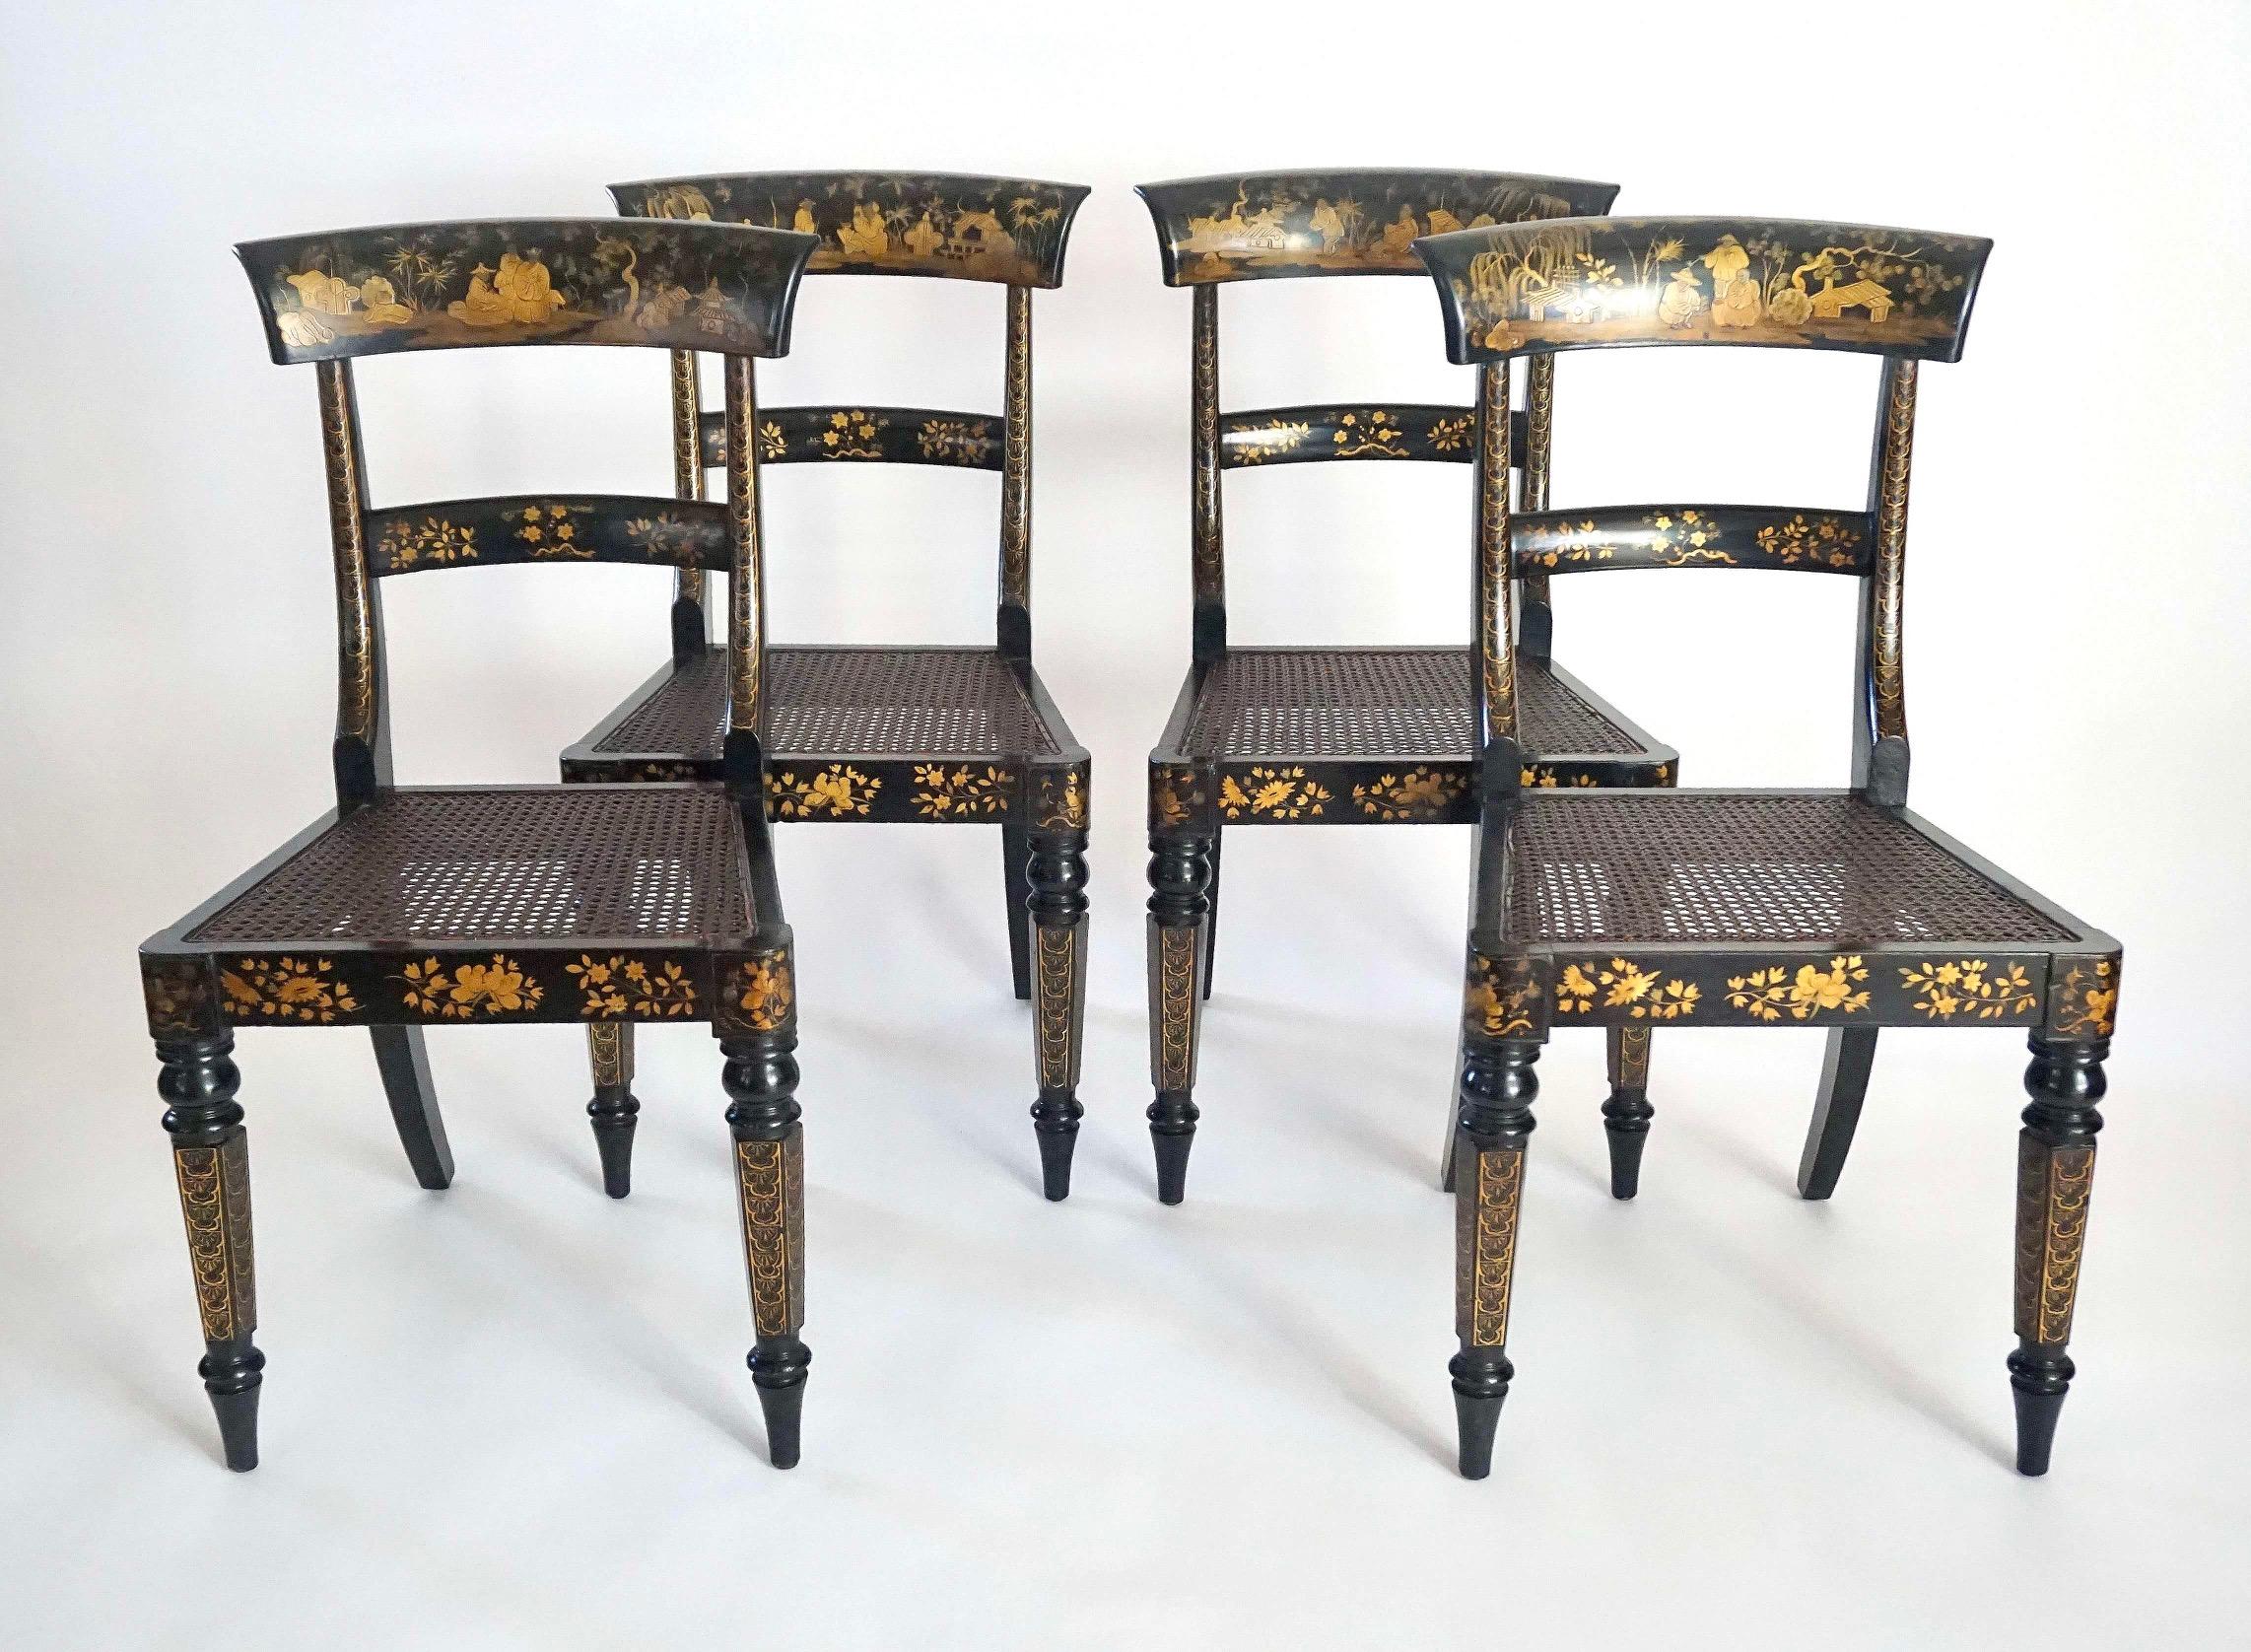 English Chinoiserie Chairs, Ex-Garvan Collection Yale University, circa 1835 For Sale 9